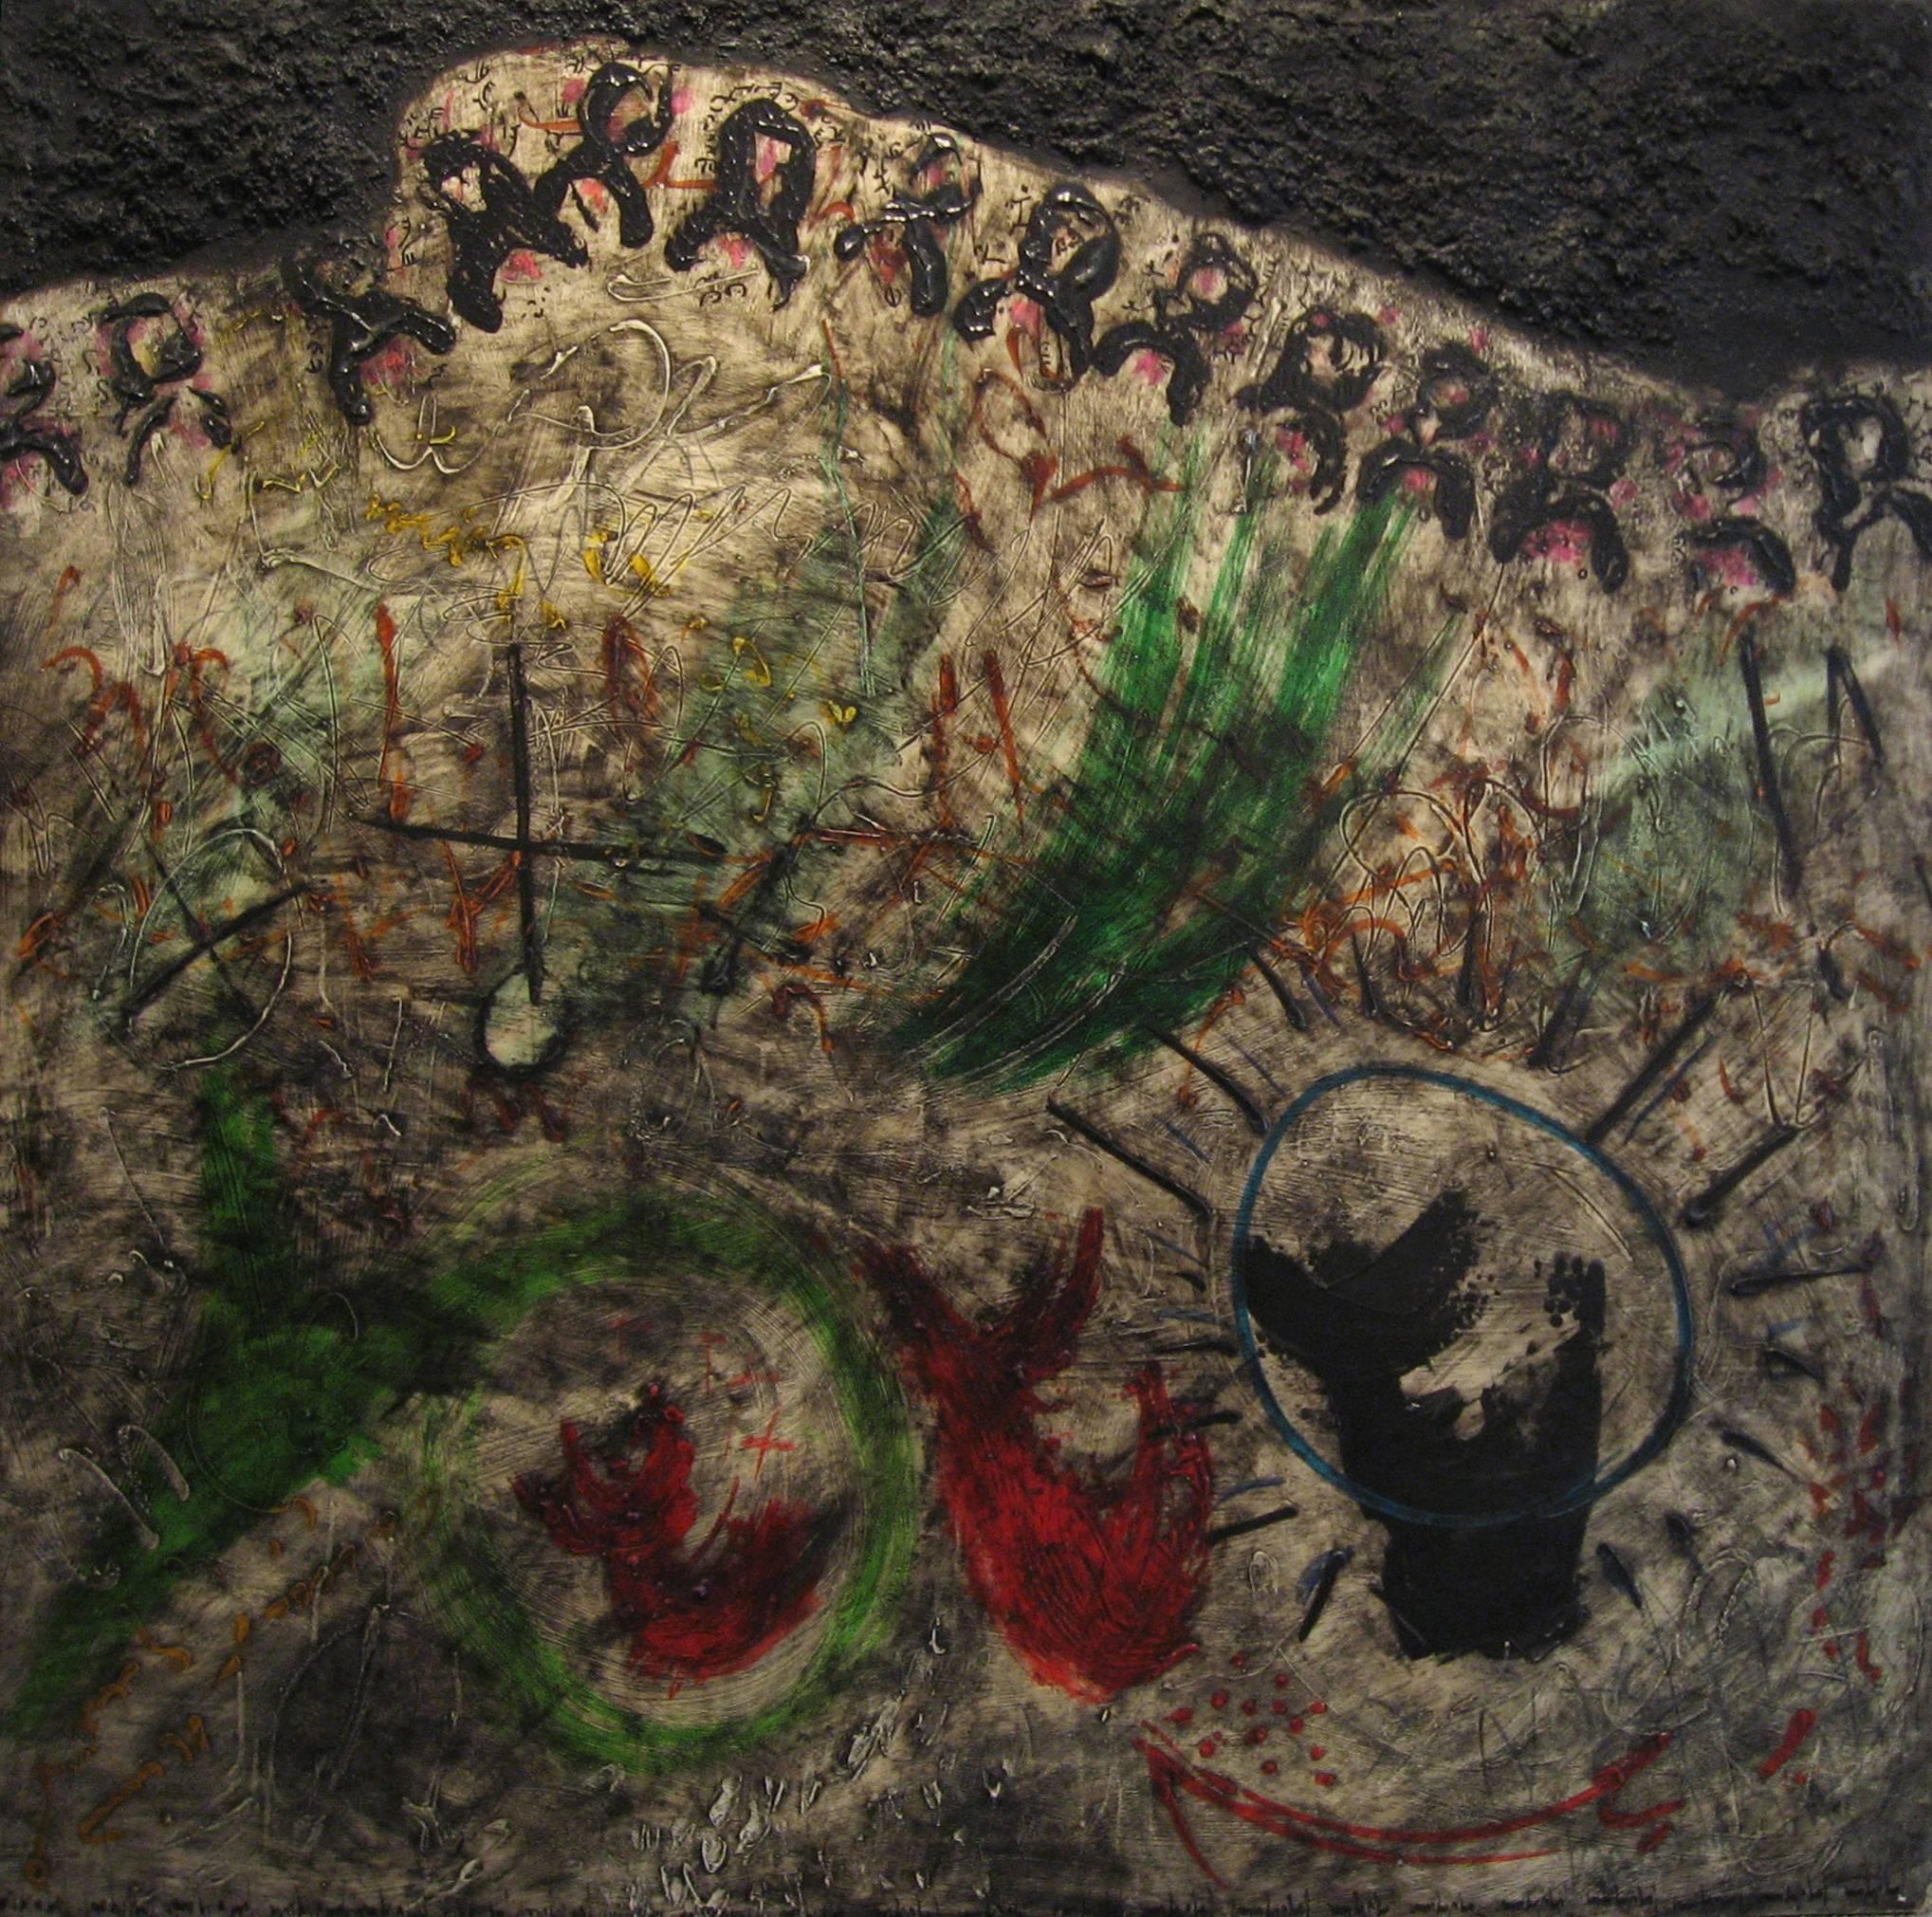 Jorge Piqueras (1925) Composition, Paris 1961, oil and mixed media on canvas; signed on the verse.

SIZE: cm. 130 x 130 x 2

Certificate of Authenticity:
Galleria Michelangelo

Publications:
METRO 2 p. 77

Jorge Piqueras was born in Lima (Perù) in